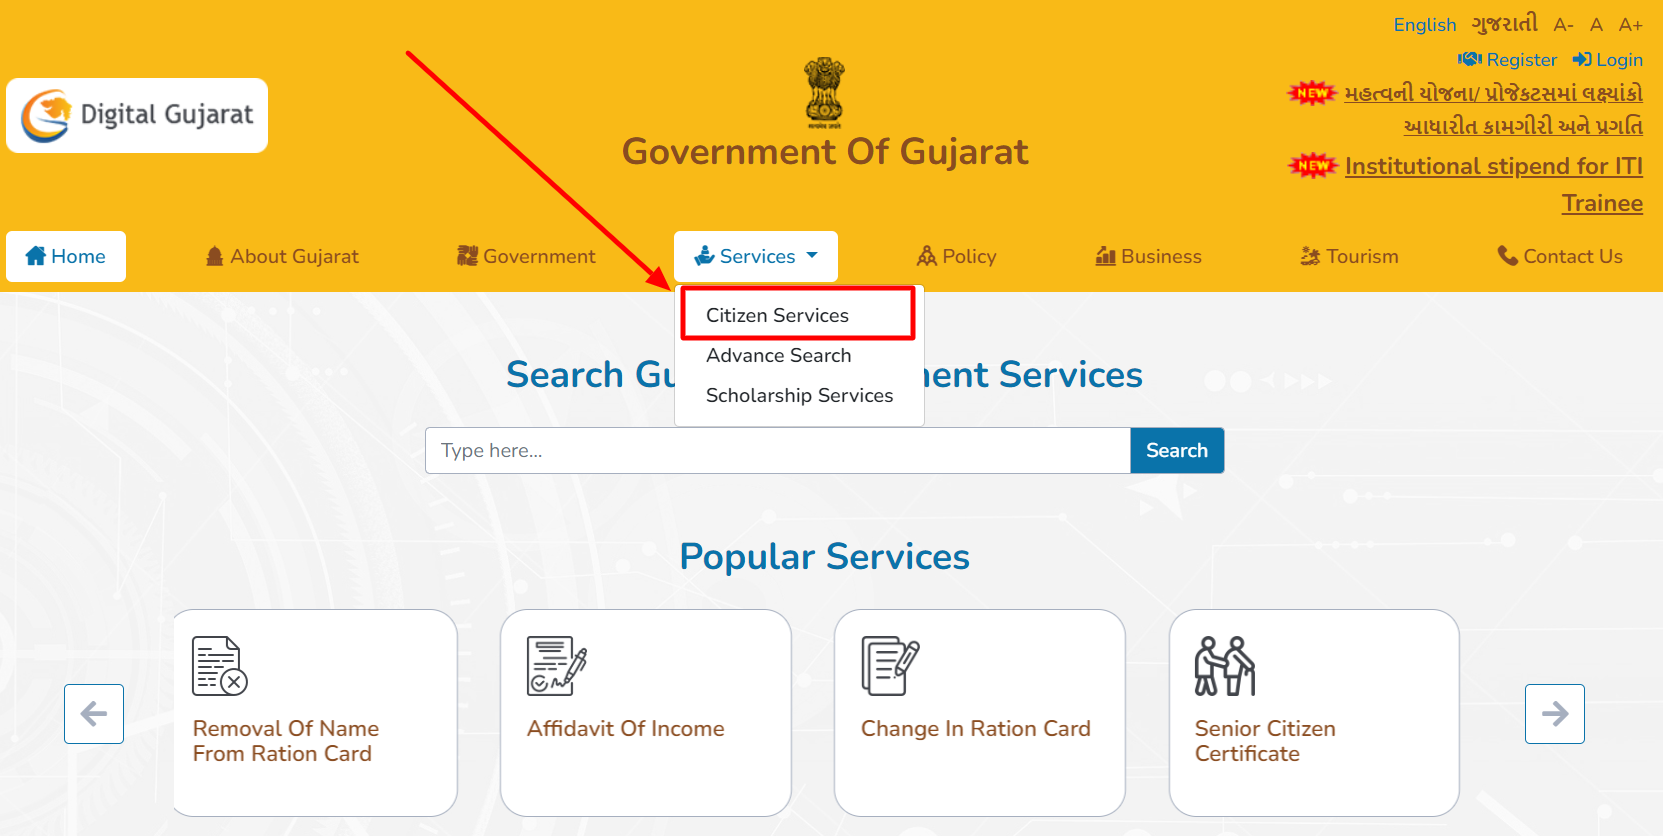 didgital gujraat official web portal and go to servies